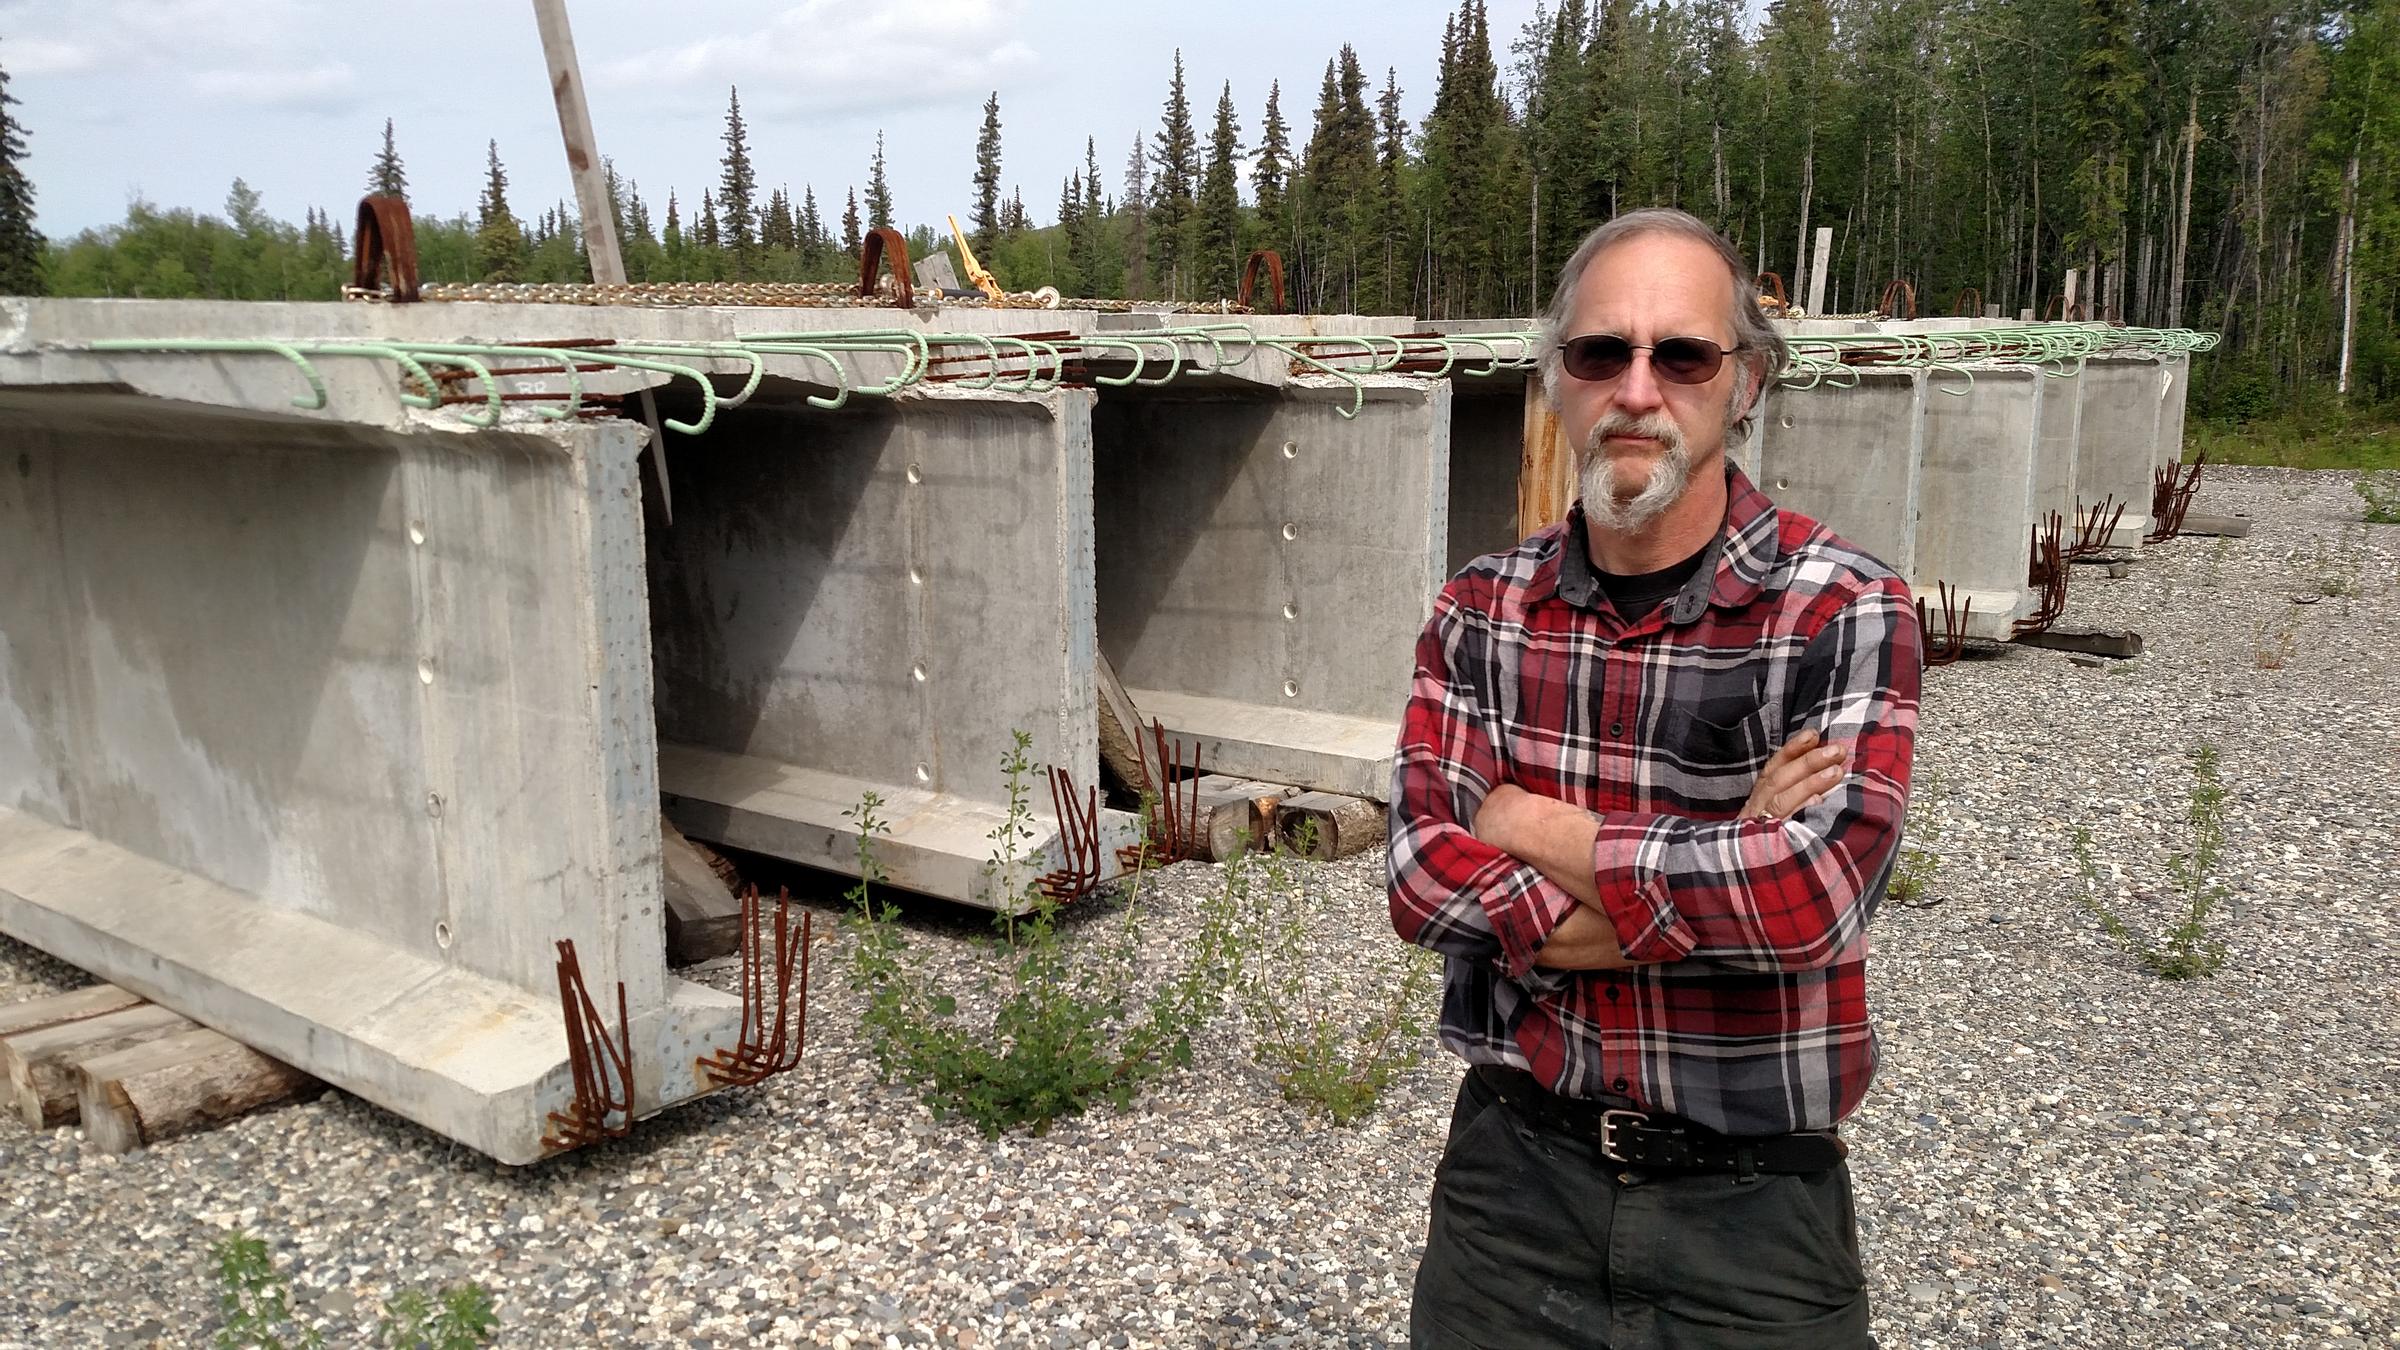 Nenana Mayor Jason Mayrand says the city has bought all the materials needed to build the Nenana River bridge, such as these enormous cast-concrete girders, and stockpiled them near the construction site. (Photo by Tim Ellis, KUAC - Fairbanks)